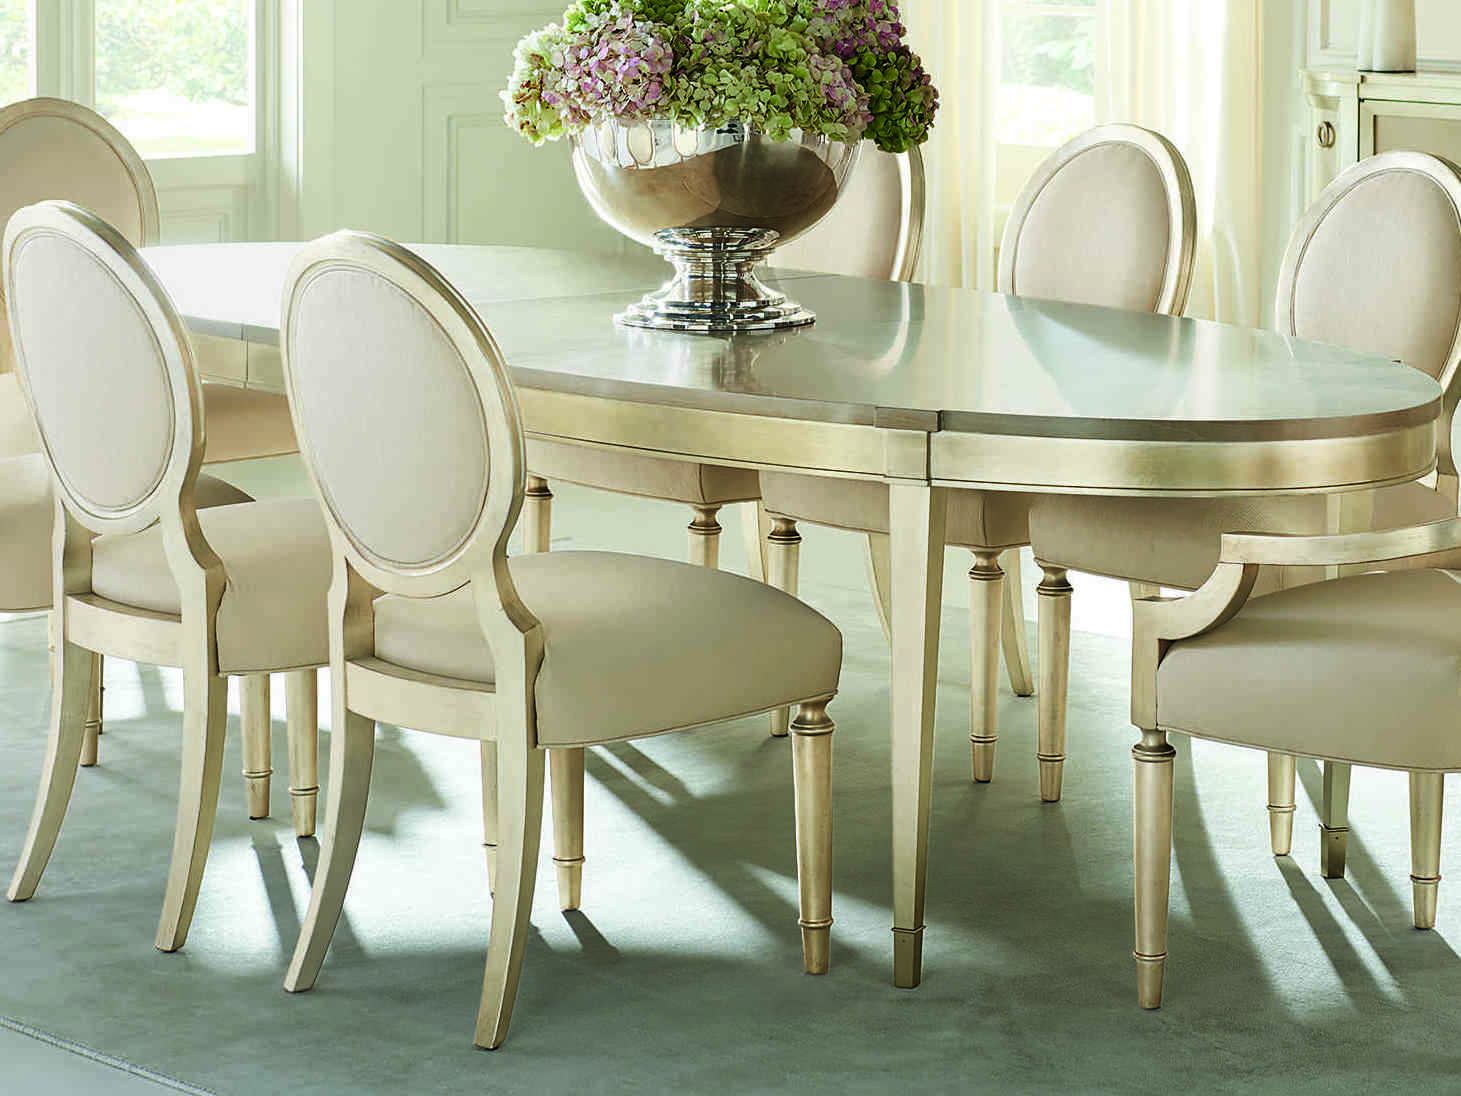 Oval Dining Table With Leaf